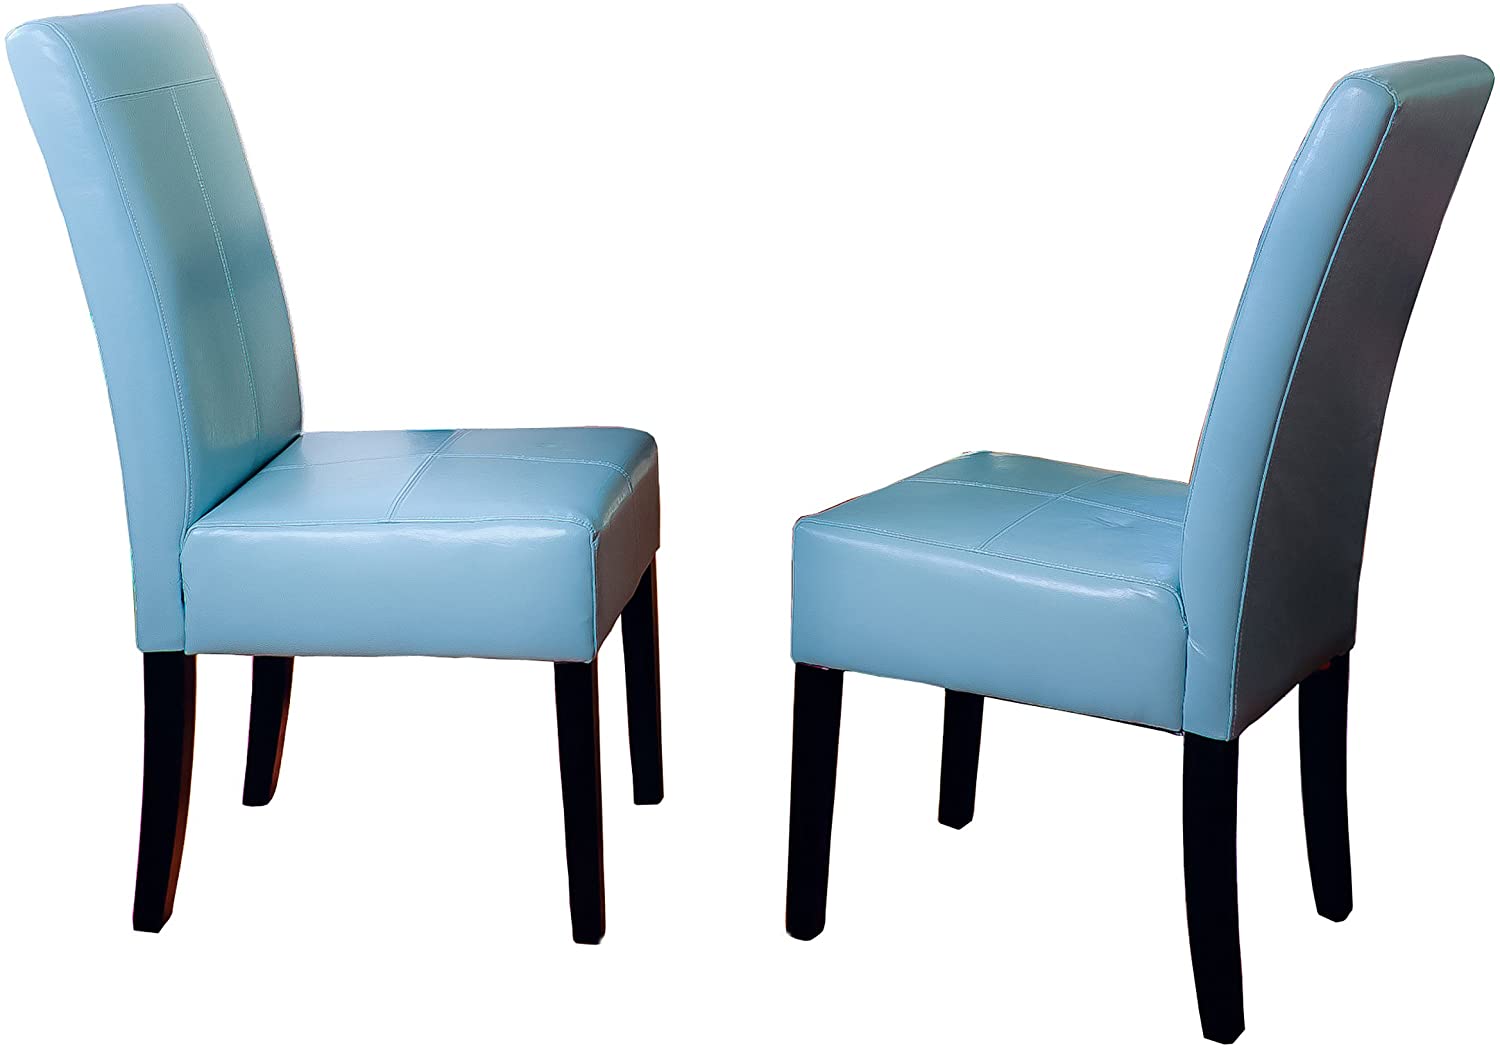 B005Q74Y72 Best Selling Teal Blue T-Stitch Bonded Leather Dining Chair, 2-Pack